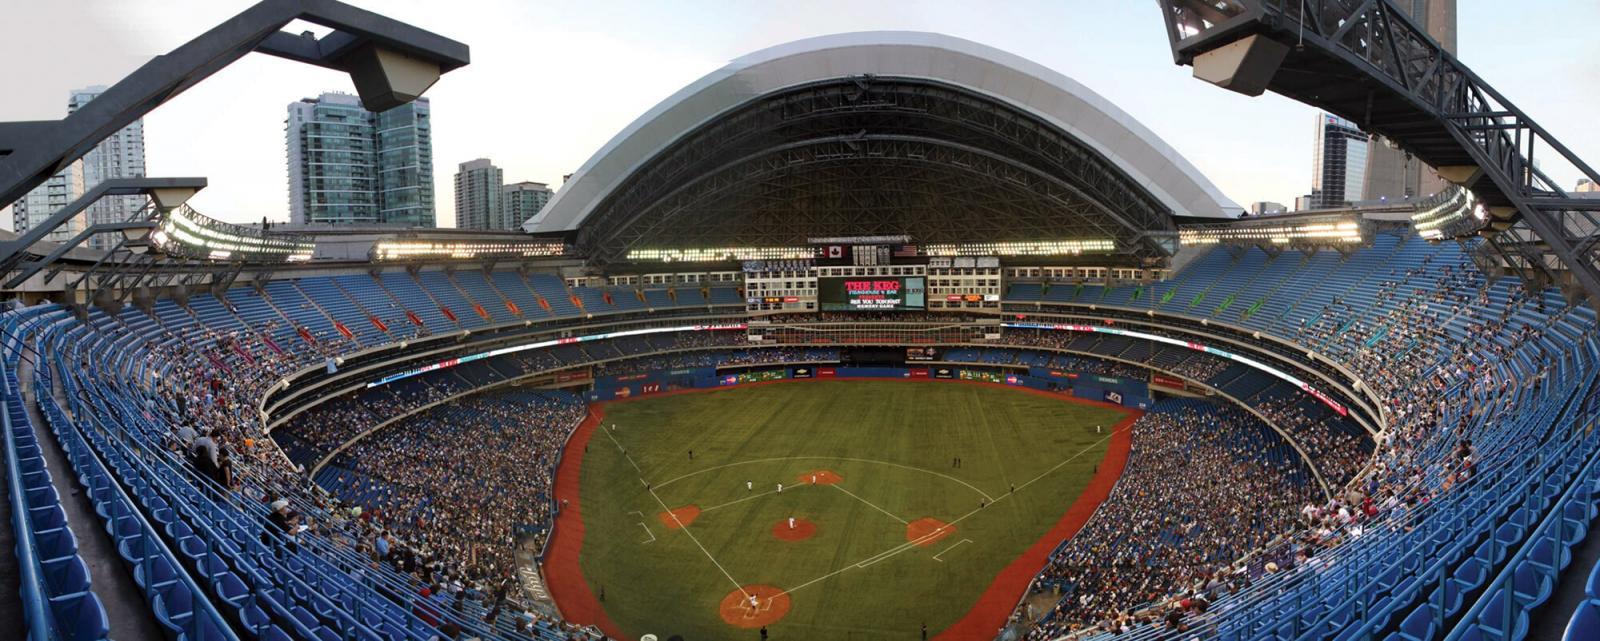 University of Guelph is working to bring real turf to the home of Toronto Blue Jays, Rogers Centre.